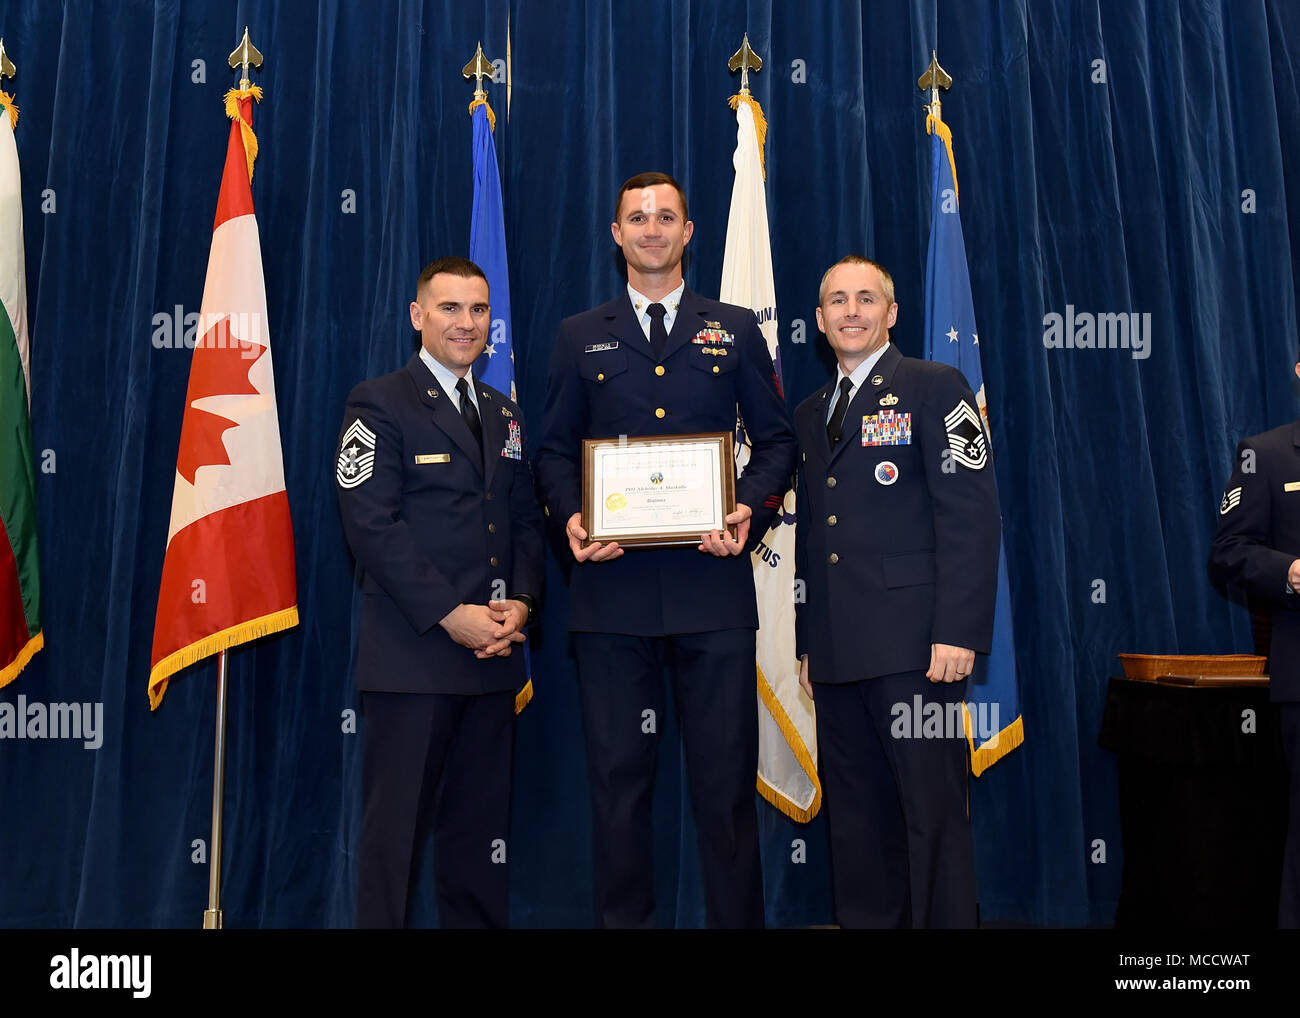 Coast Guard Petty Officer 1st Class Nicholas Muskalla, from USCG Sector Key West, Fla., takes the Distinguished Graduate Award in Noncommissioned Officer Academy Class 18-2 at the Chief Master Sgt. Paul H. Lankford Enlisted Professional Military Education Center on McGhee Tyson Air National Guard Base in East Tennessee, Feb. 8, 2018, during the graduation ceremony. (U.S. Air National Guard photo/Master Sgt. Mike R. Smith) Stock Photo